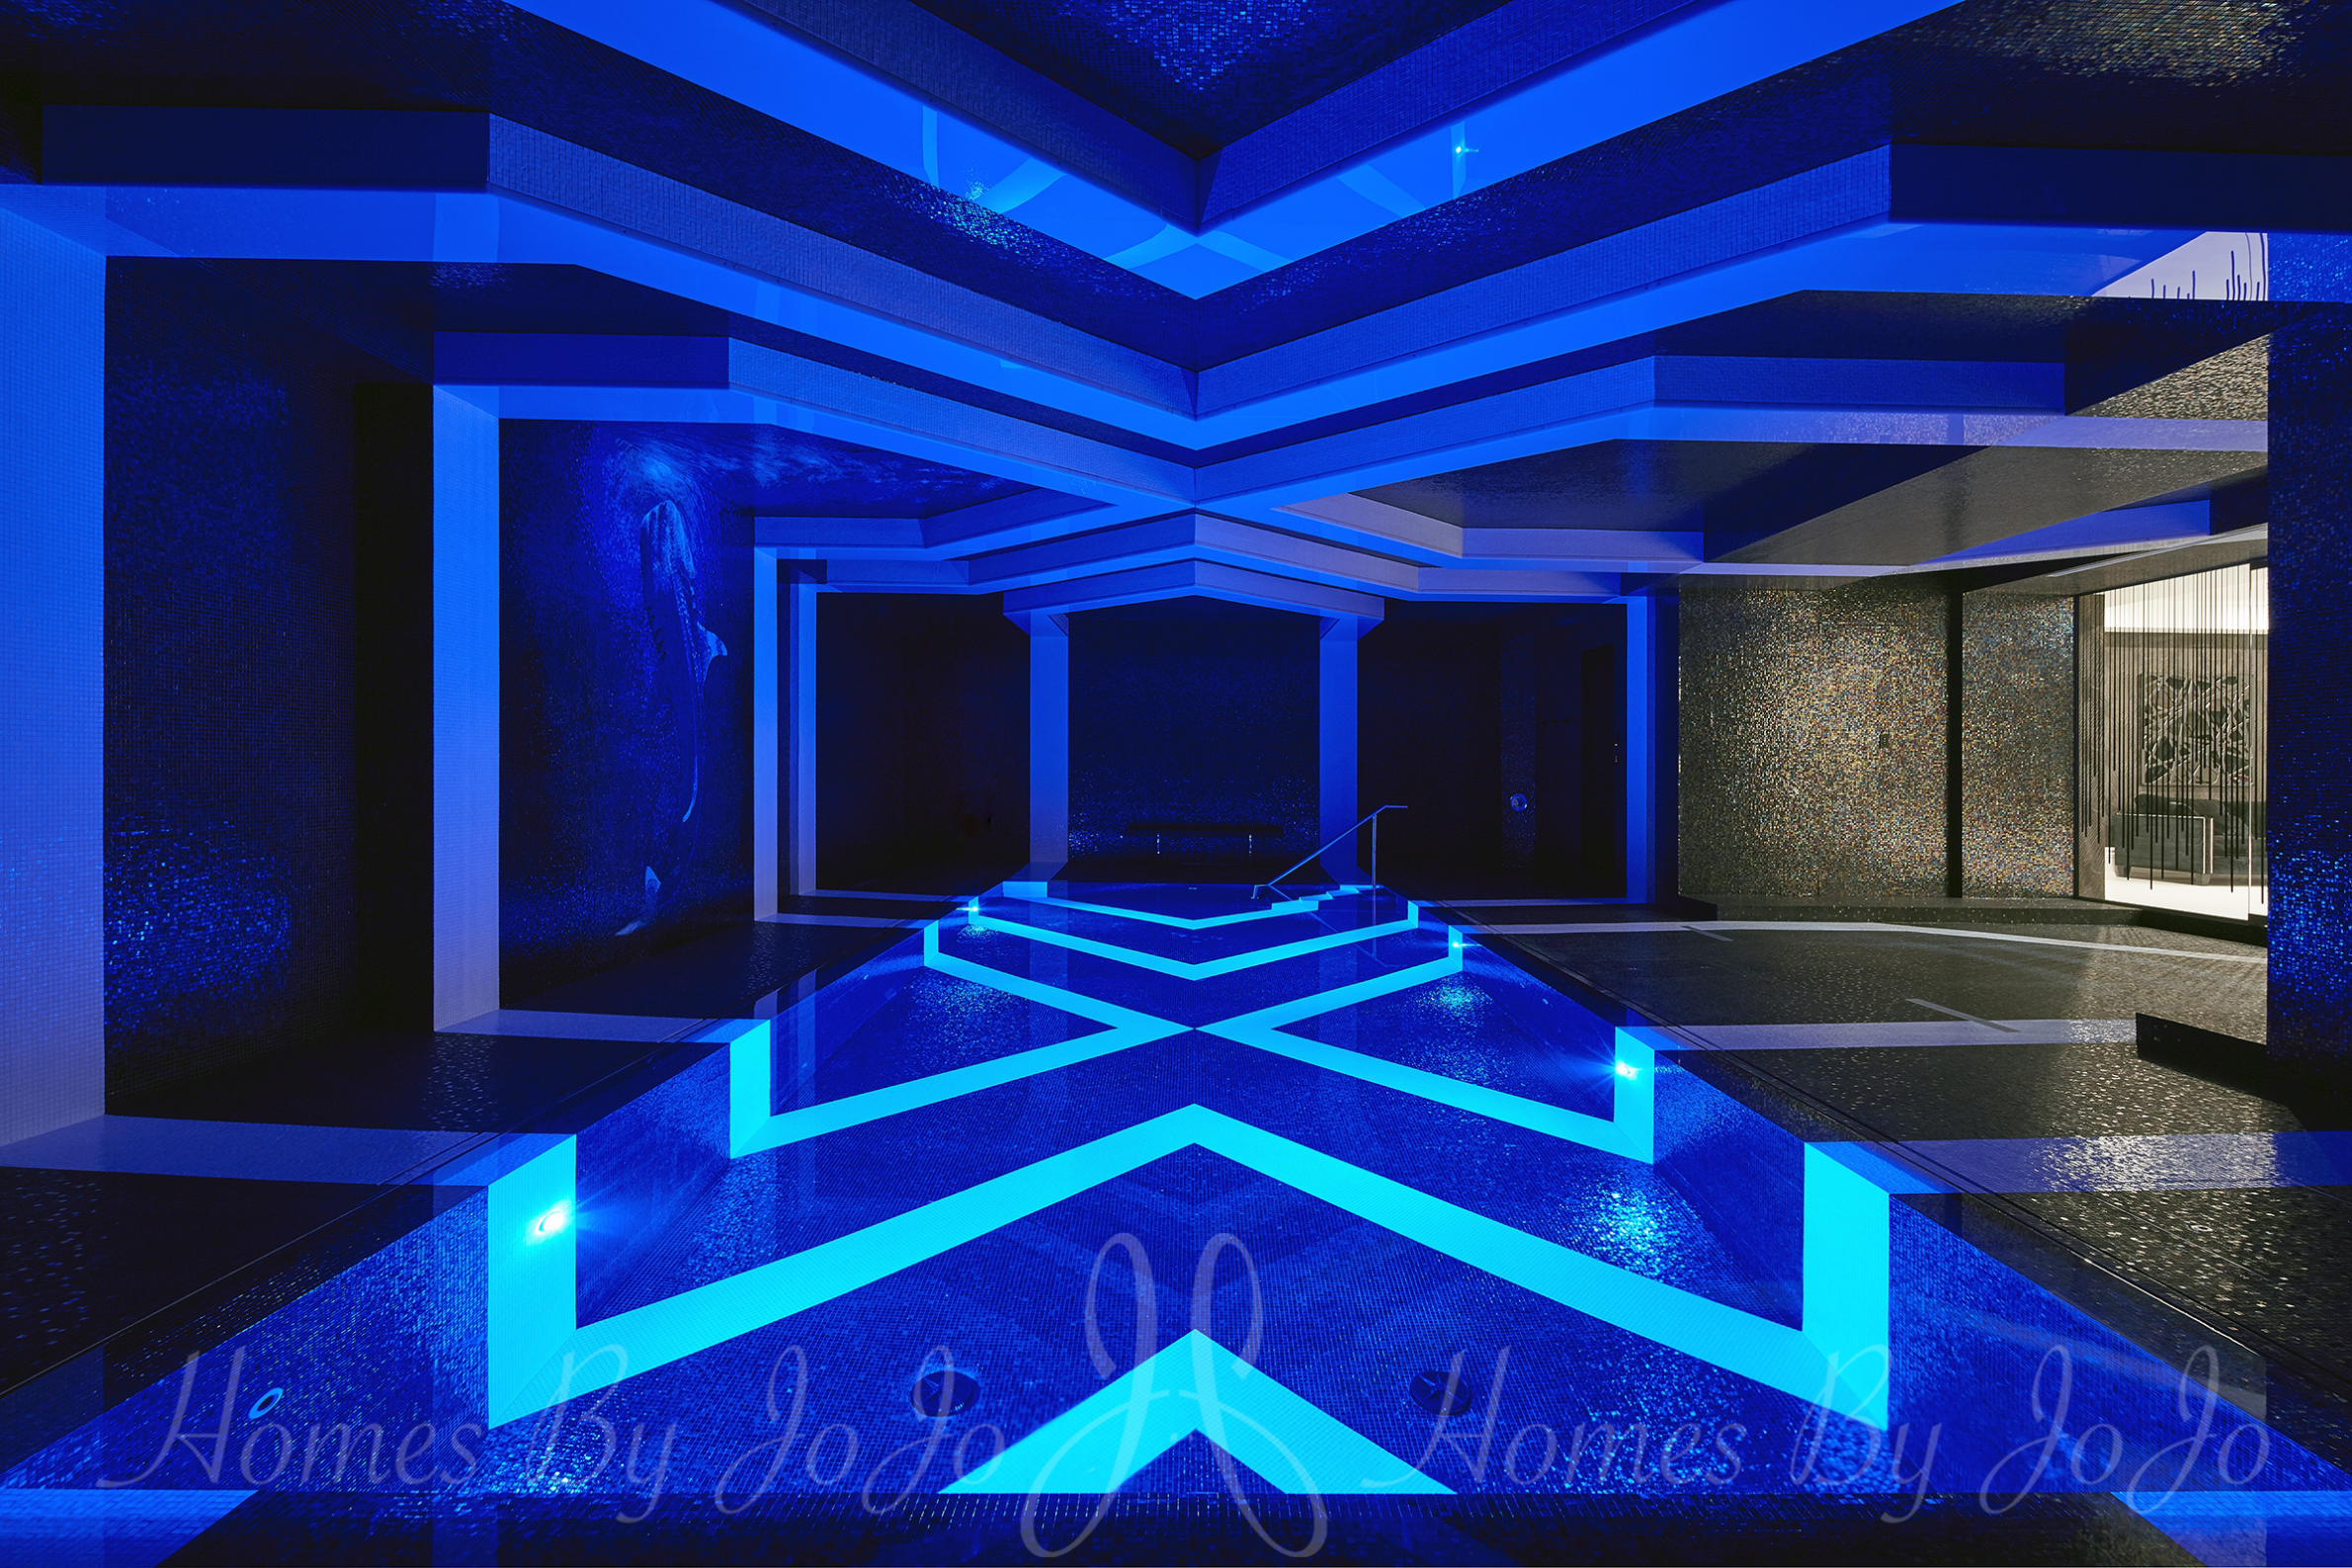 A night time view of an indoor swimming pool with glowing, bold geometric patterns surrounded by raised, light colored geometric lines on dark walls